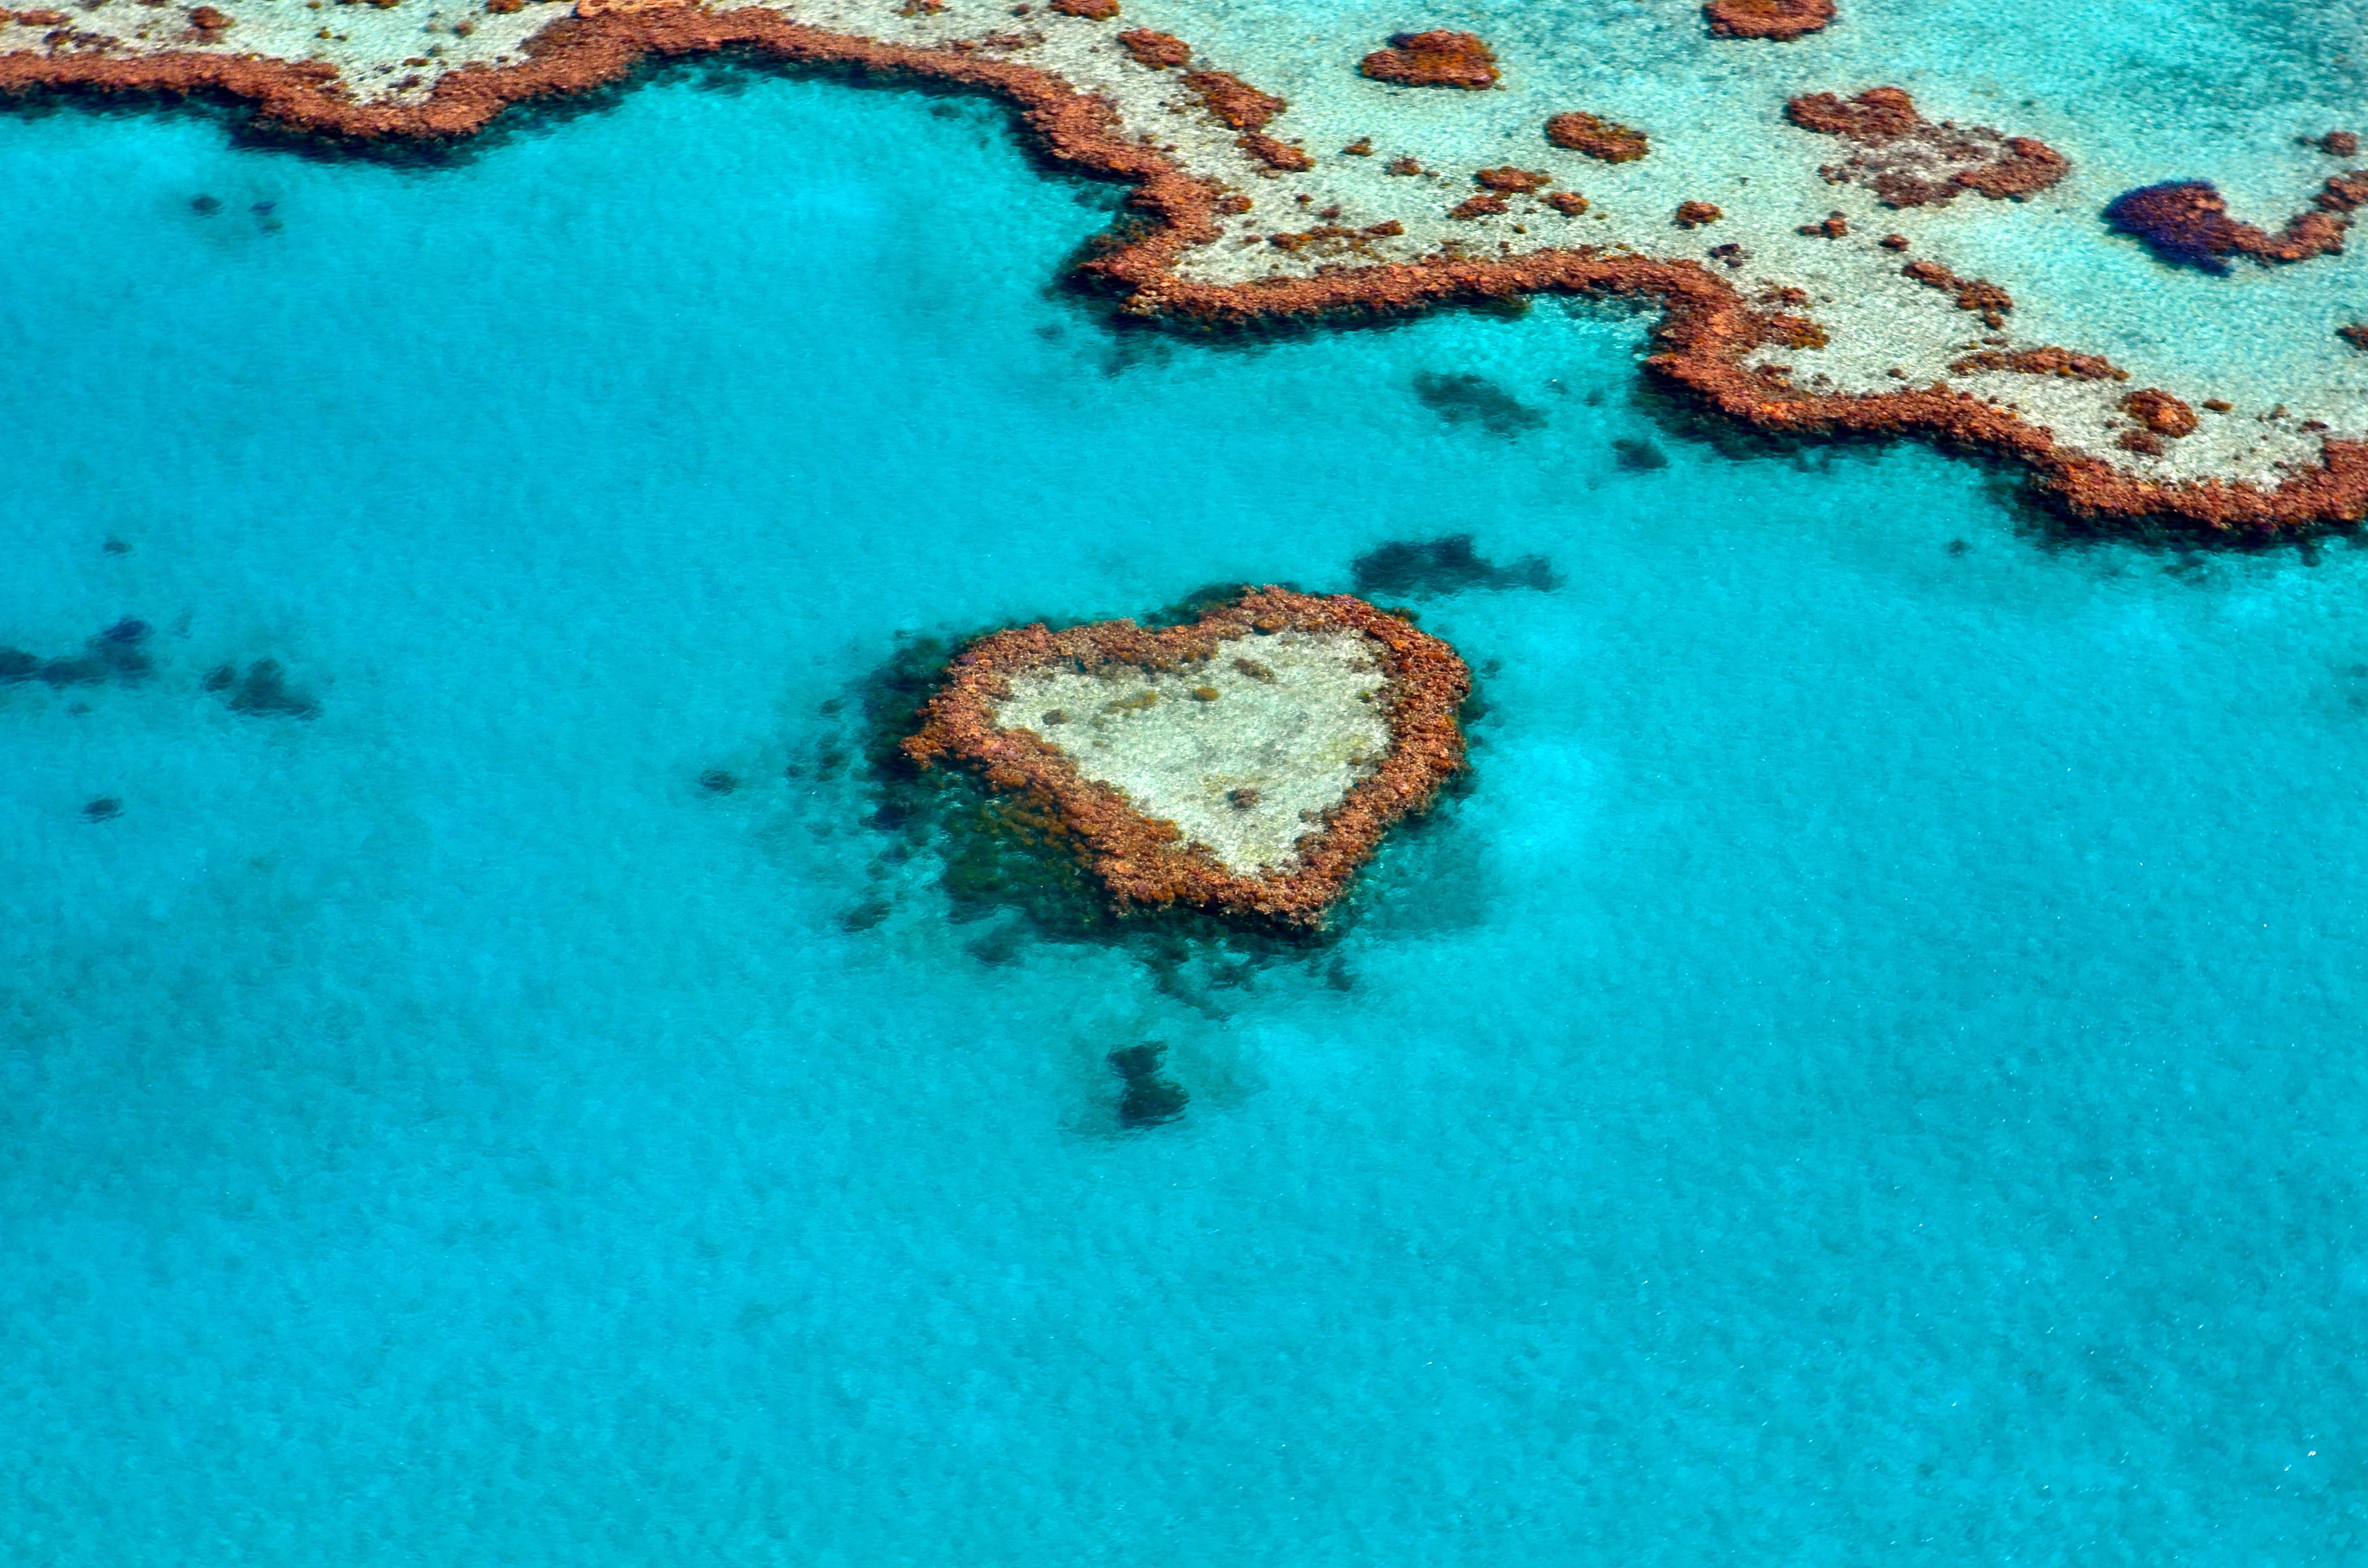 HD wallpaper, Great Barrier Reef, Australia, Tourist Attraction, Love Heart, Heart Reef, Coral Reef, 5K, Aerial Photography